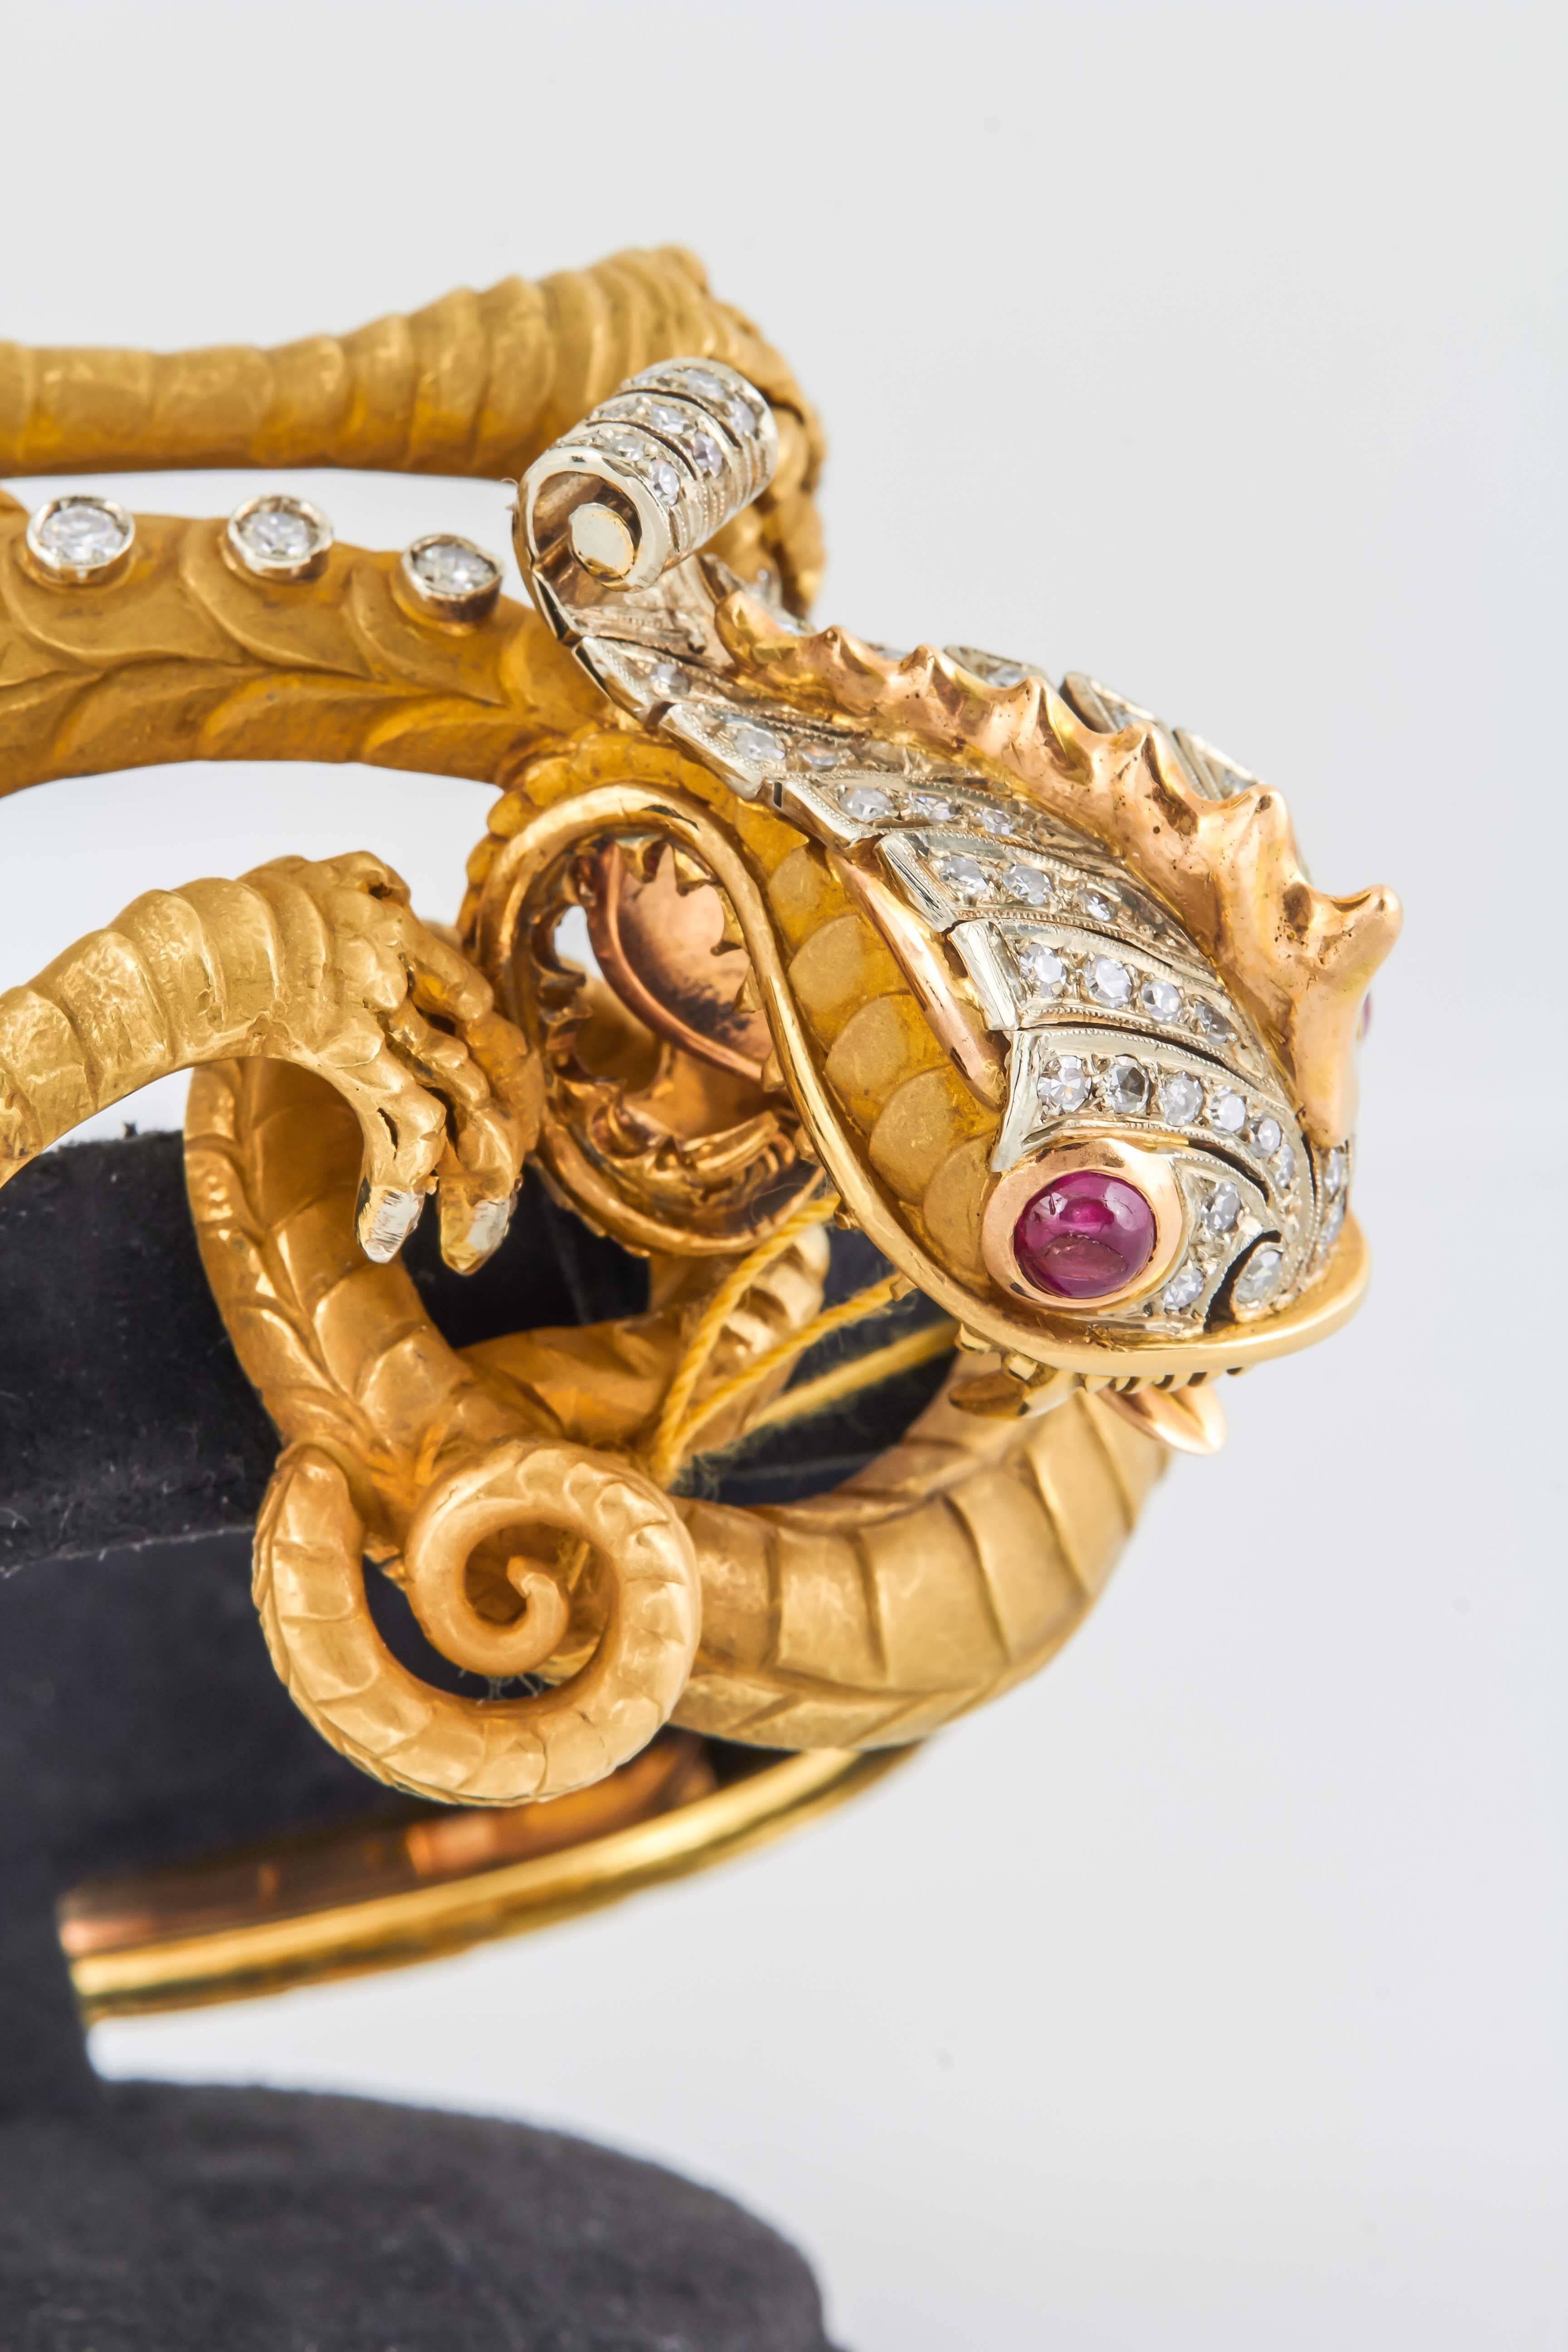 Gorgeous Dragon bracelet  finely crafted in 18k yellow gold with round brilliant cut diamonds  weighing approx. 3.35 carats and two ruby eyes.
Circa's 1960's 
75.9 dwt.